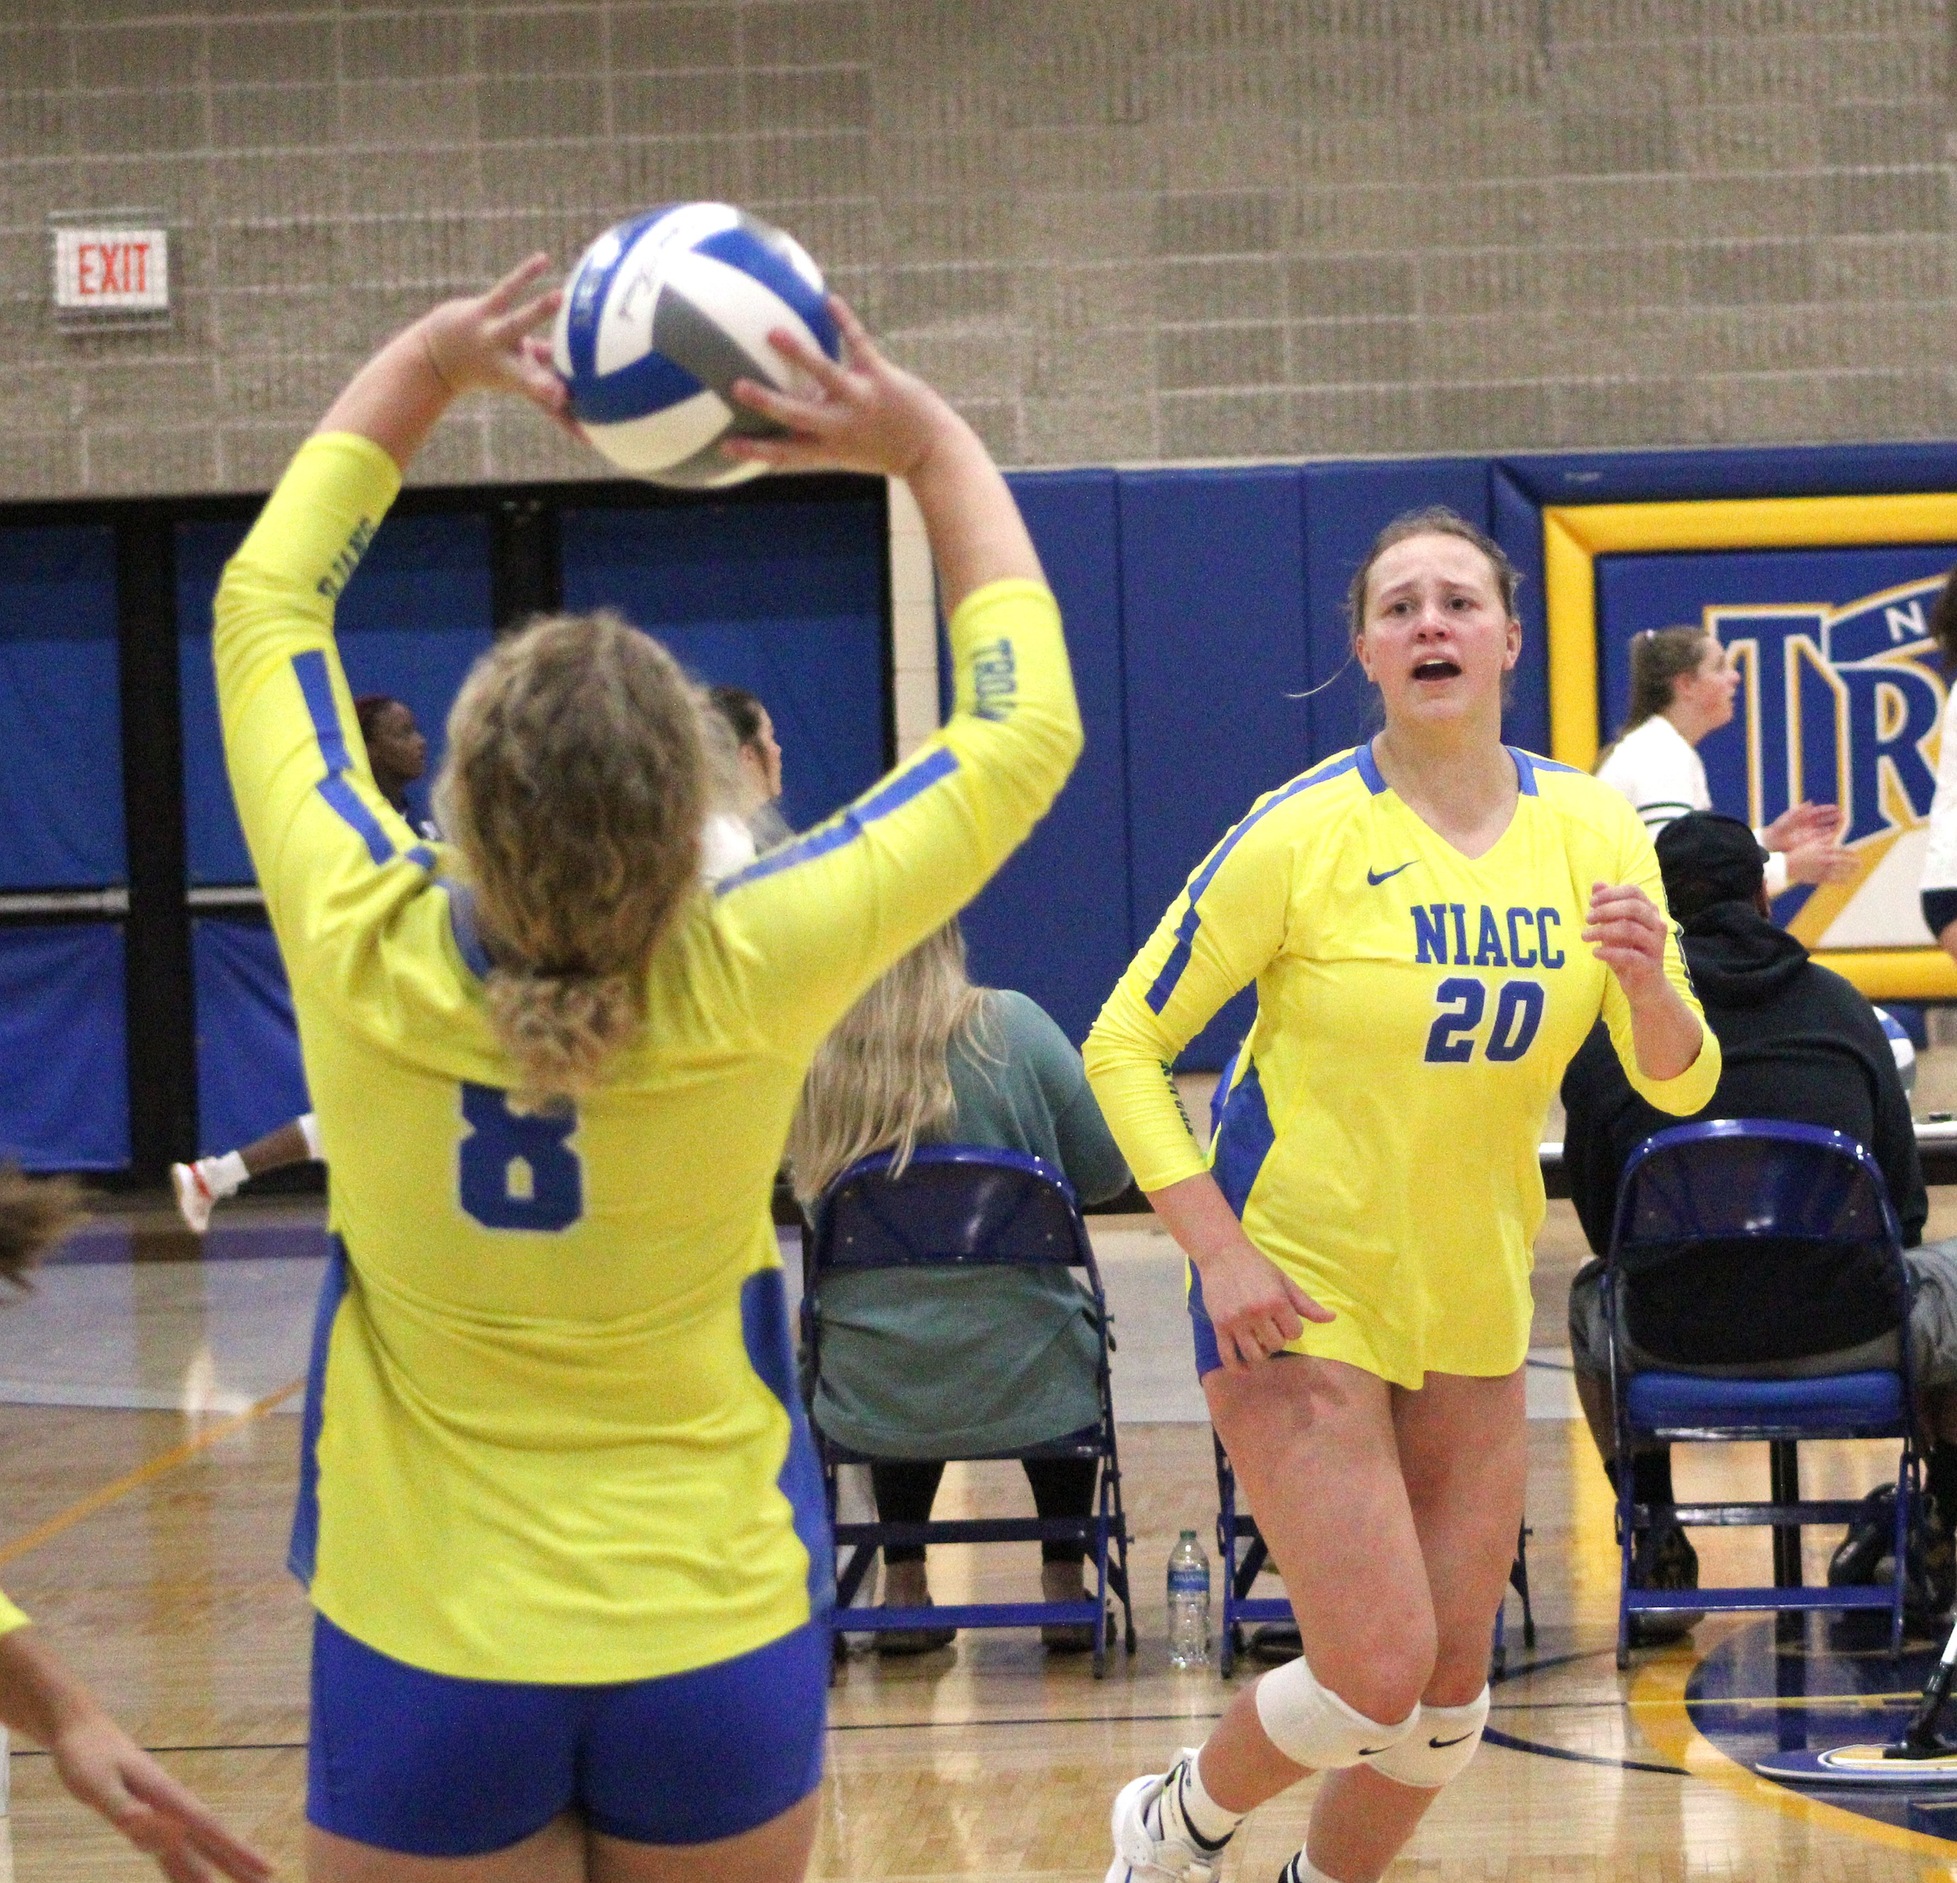 NIACC's Ryley Wetlaufer sets the ball in a match last fall in the NIACC gym.